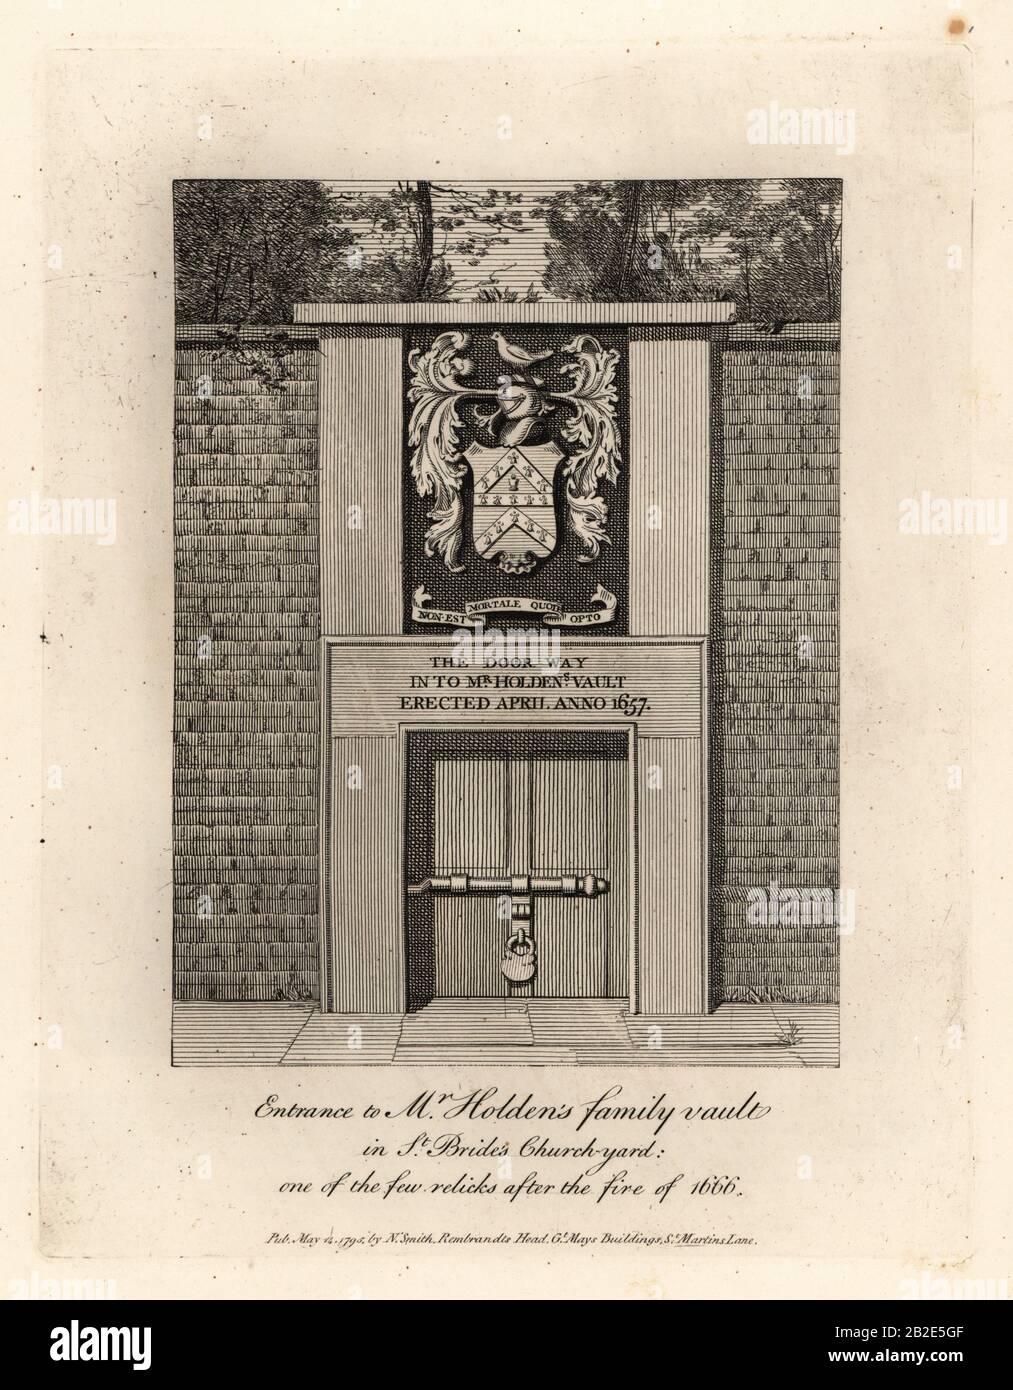 Entrance to Mr. Holden’s Family Vault in St. Bride’s churchyard, one of the few relics after the Fire of London 1666. Built in 1657 with coat of arms above the door. Copperplate engraving by John Thomas Smith after original drawings by members of the Society of Antiquaries from his J.T. Smith’s Antiquities of London and its Environs, J. Sewell, R. Folder, J. Simco, London, 1795. Stock Photo